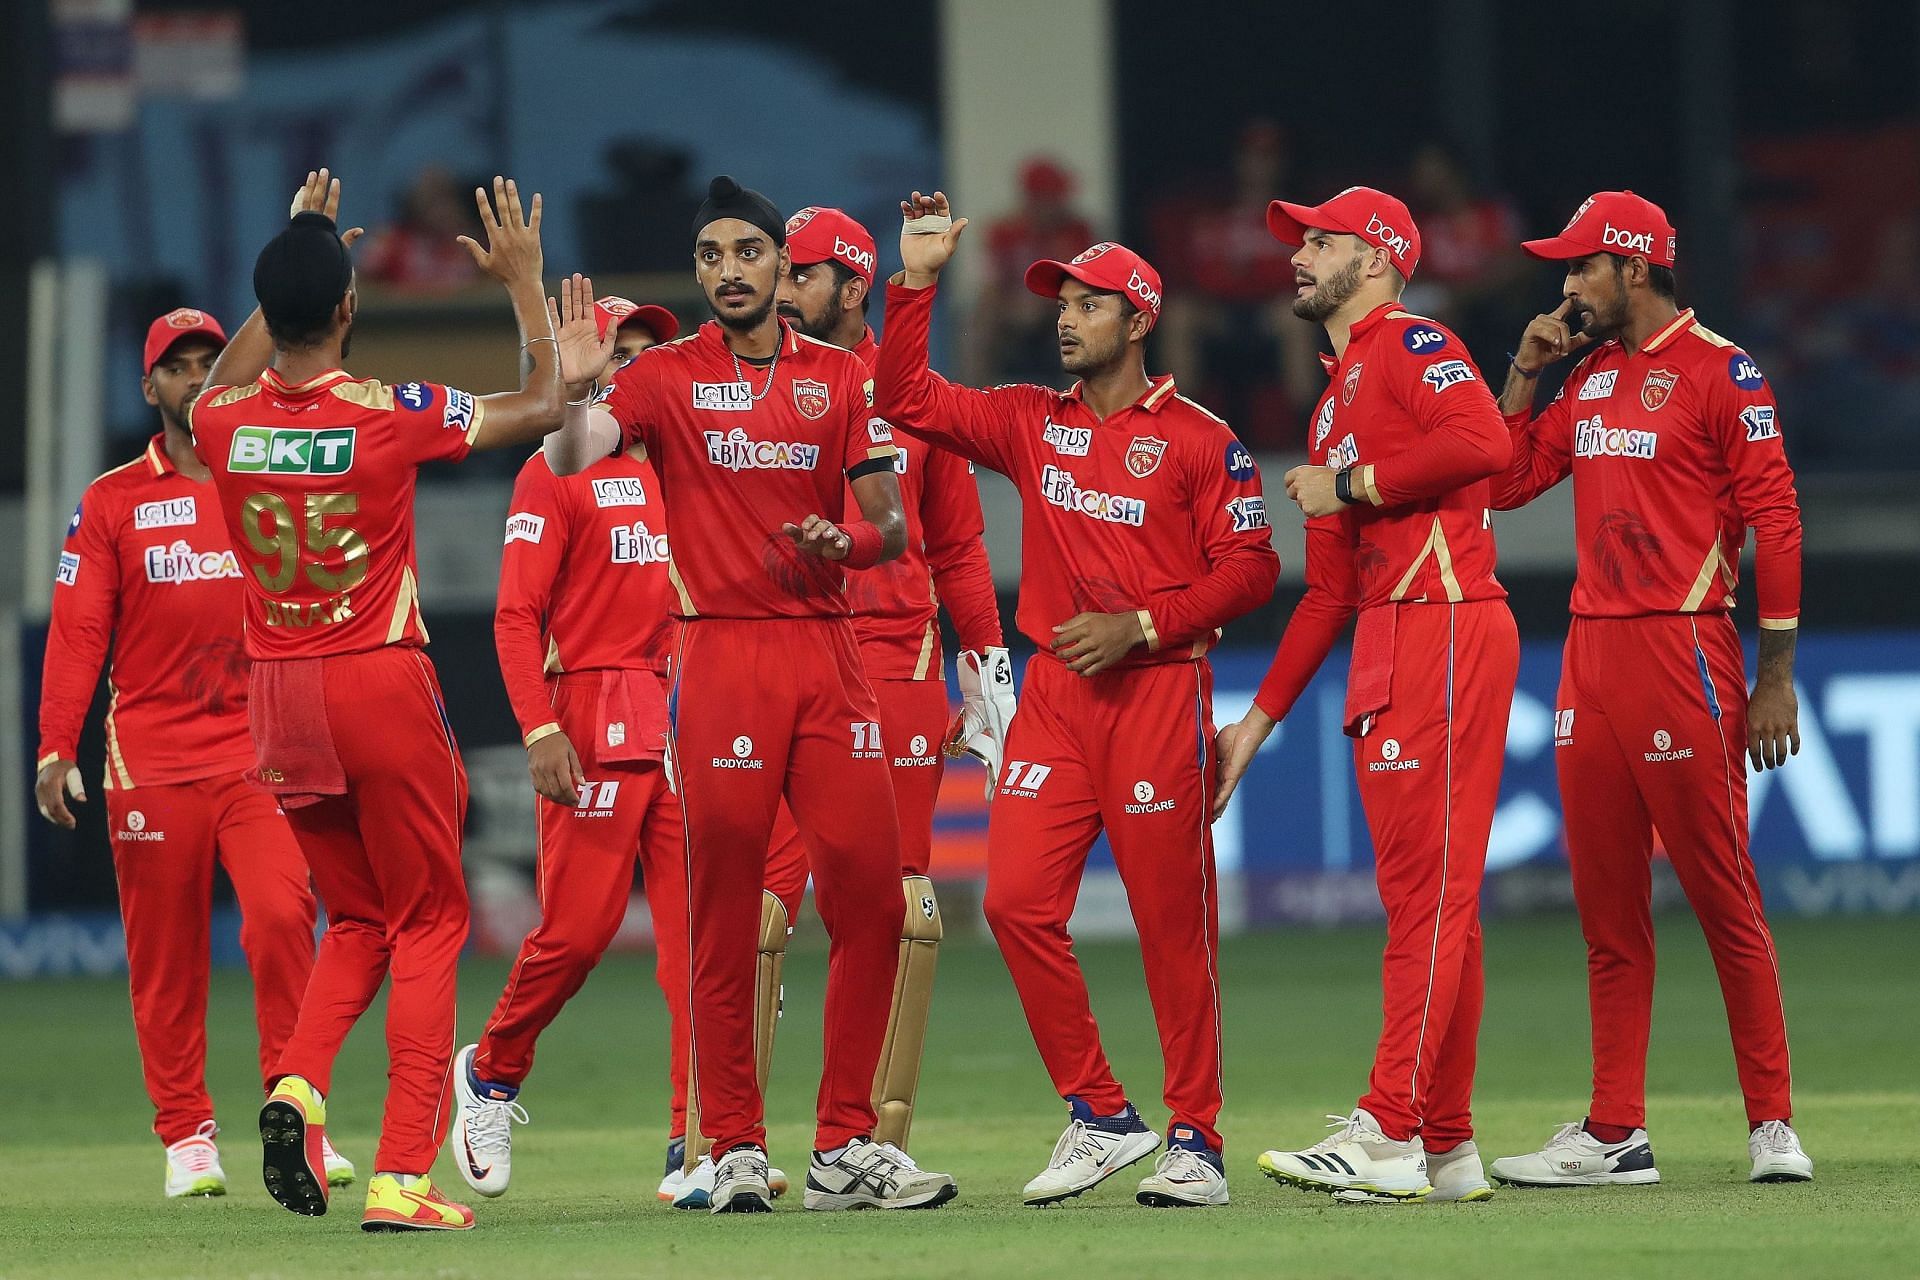 Punjab Kings struggled with their middle order in IPL 2021